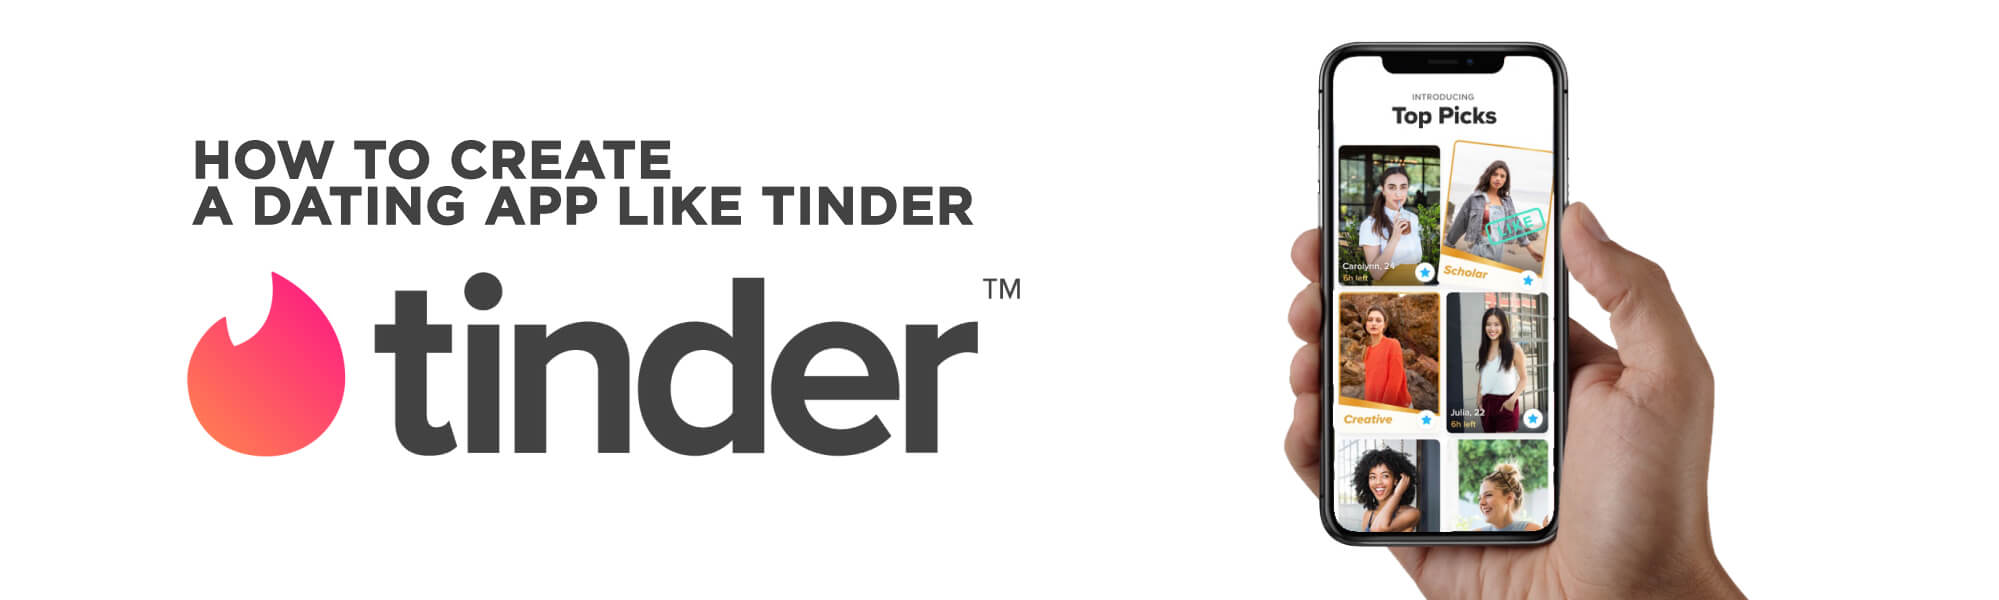 How to Make a Dating App Like Tinder